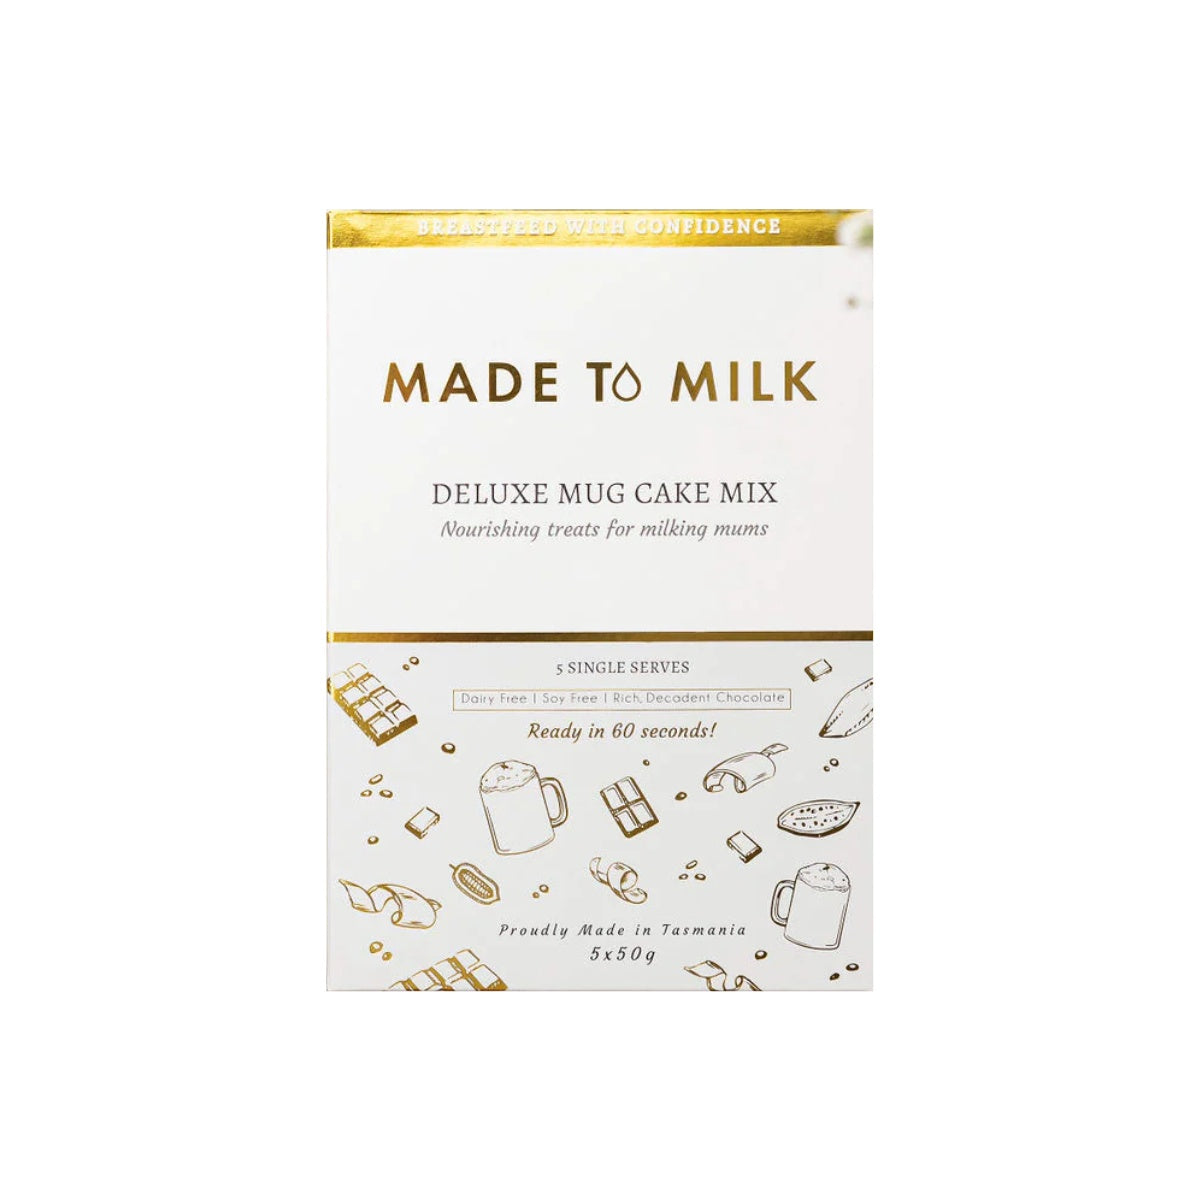 Made to Milk - Deluxe Mug Cake Mix - 5 pack